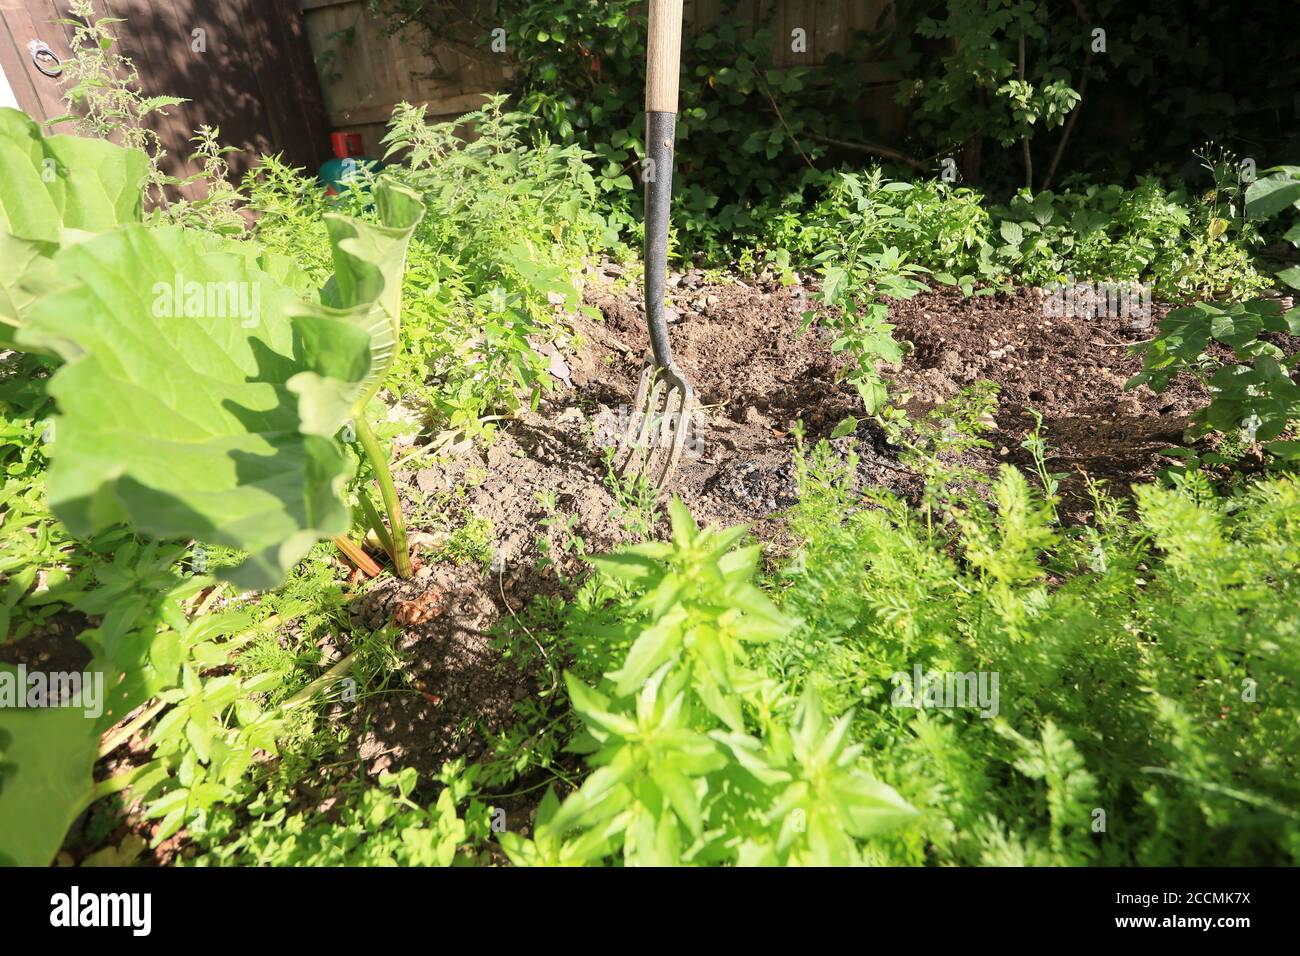 an allotment or back garden o year with a fork in the veg patch amongst potato, rhubarb and carrots Stock Photo